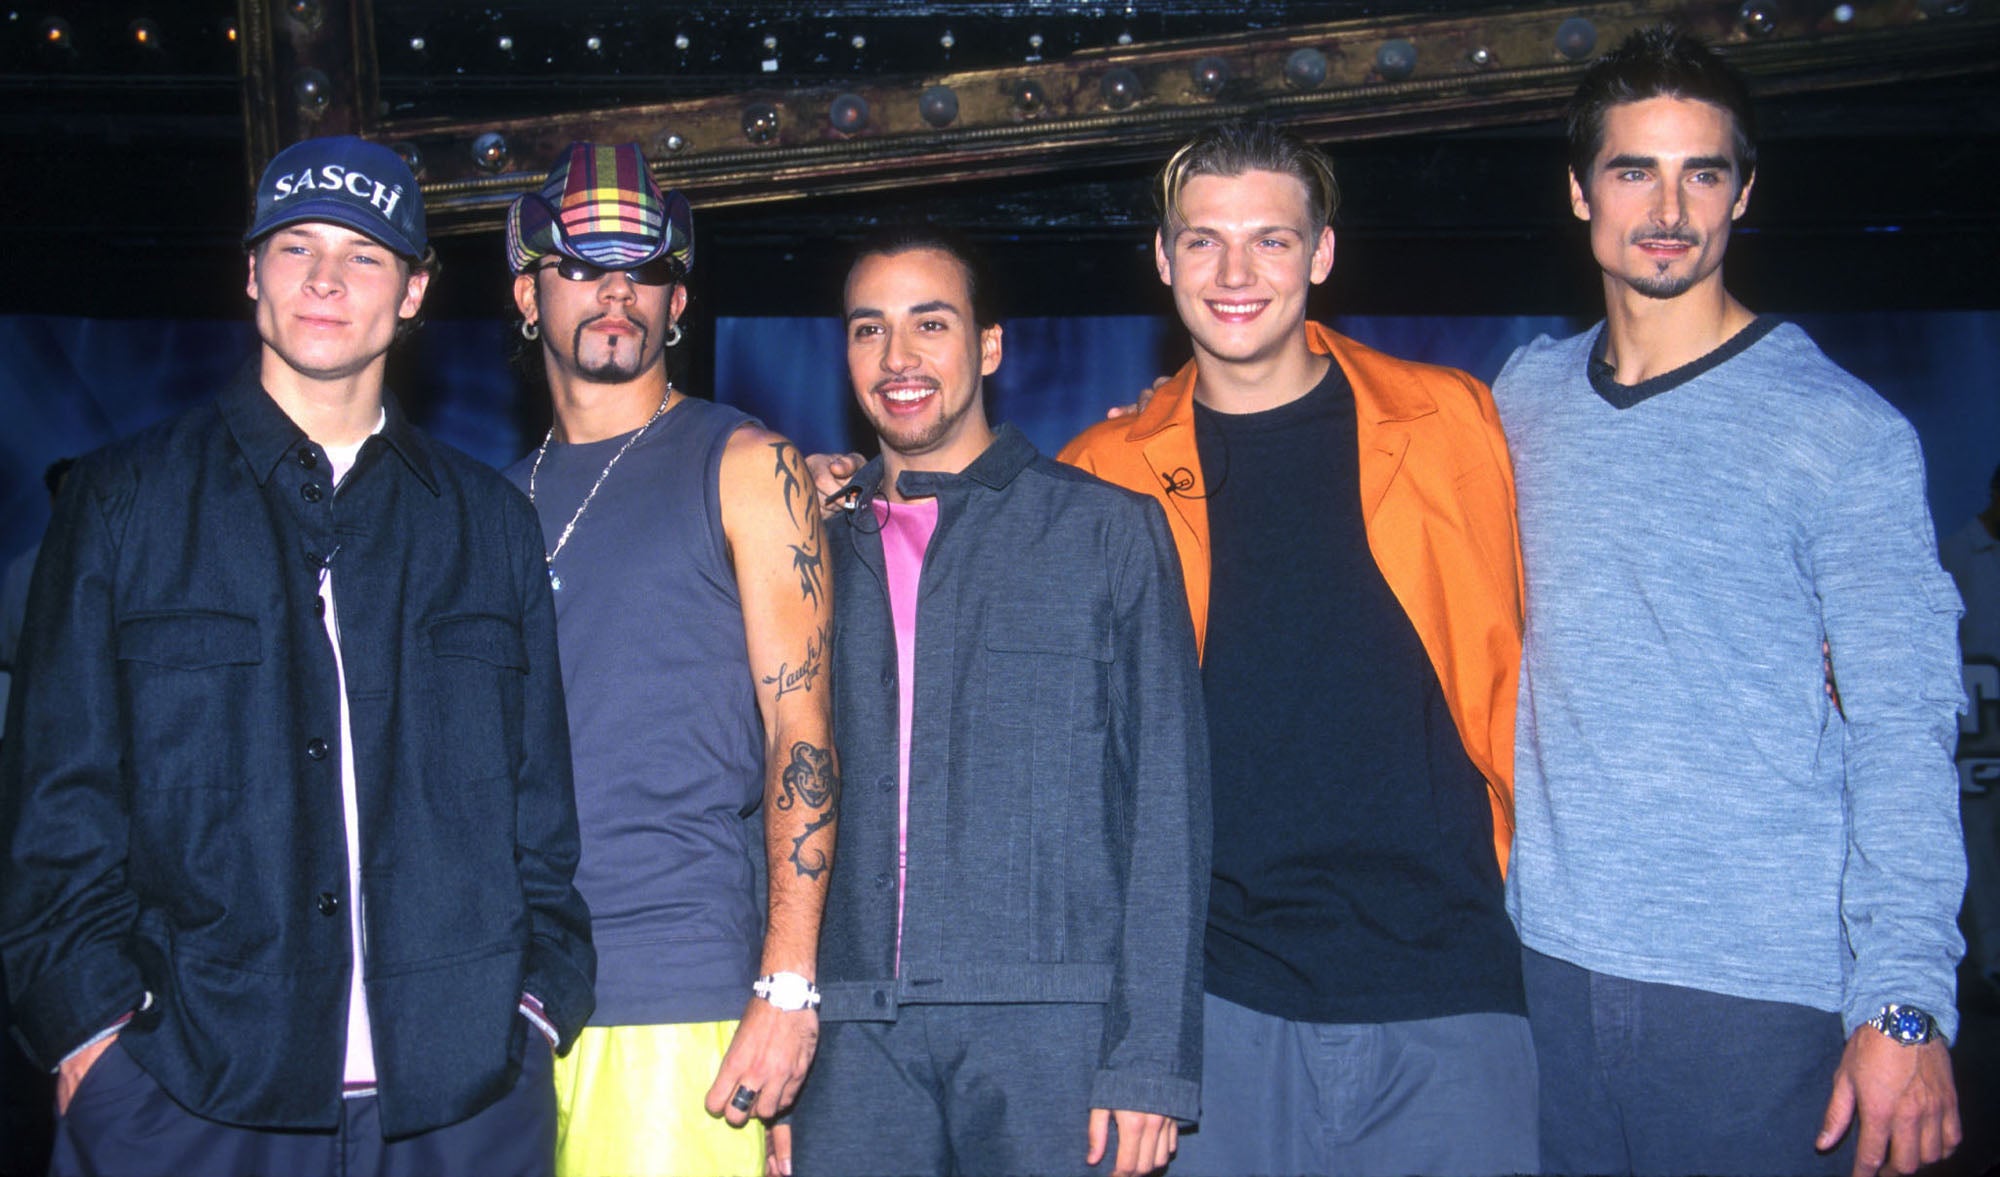 Backstreet　the　at　Independent　of　Millennium　fall　music　and　Boys'　decline　the　20　The　The　and　industry　Independent